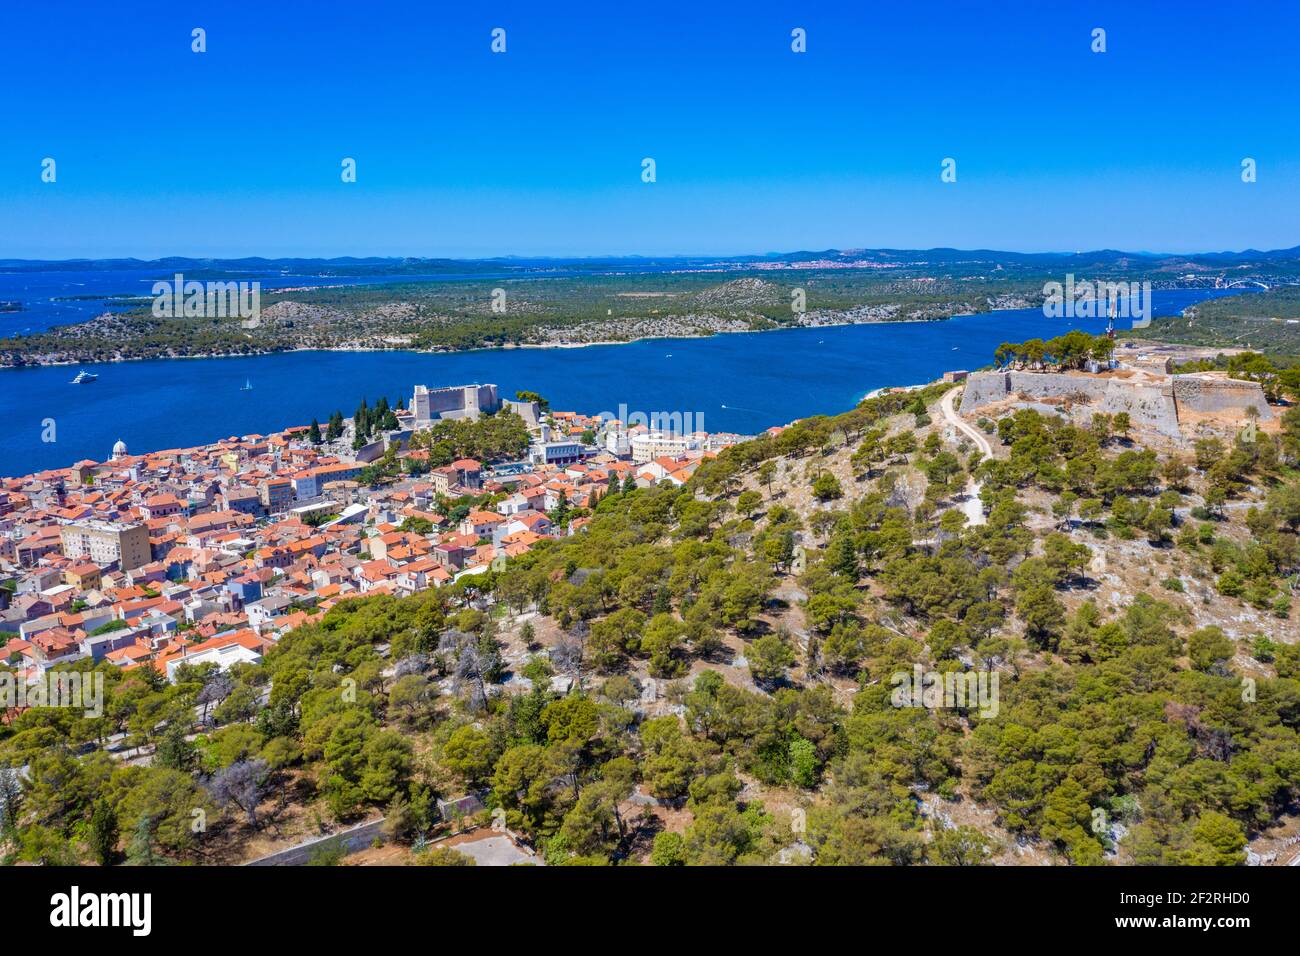 Aerial view of Croatian town Sibenik with Saint michael's fortress, Saint John's Fortress and Sveti Ante channel Stock Photo